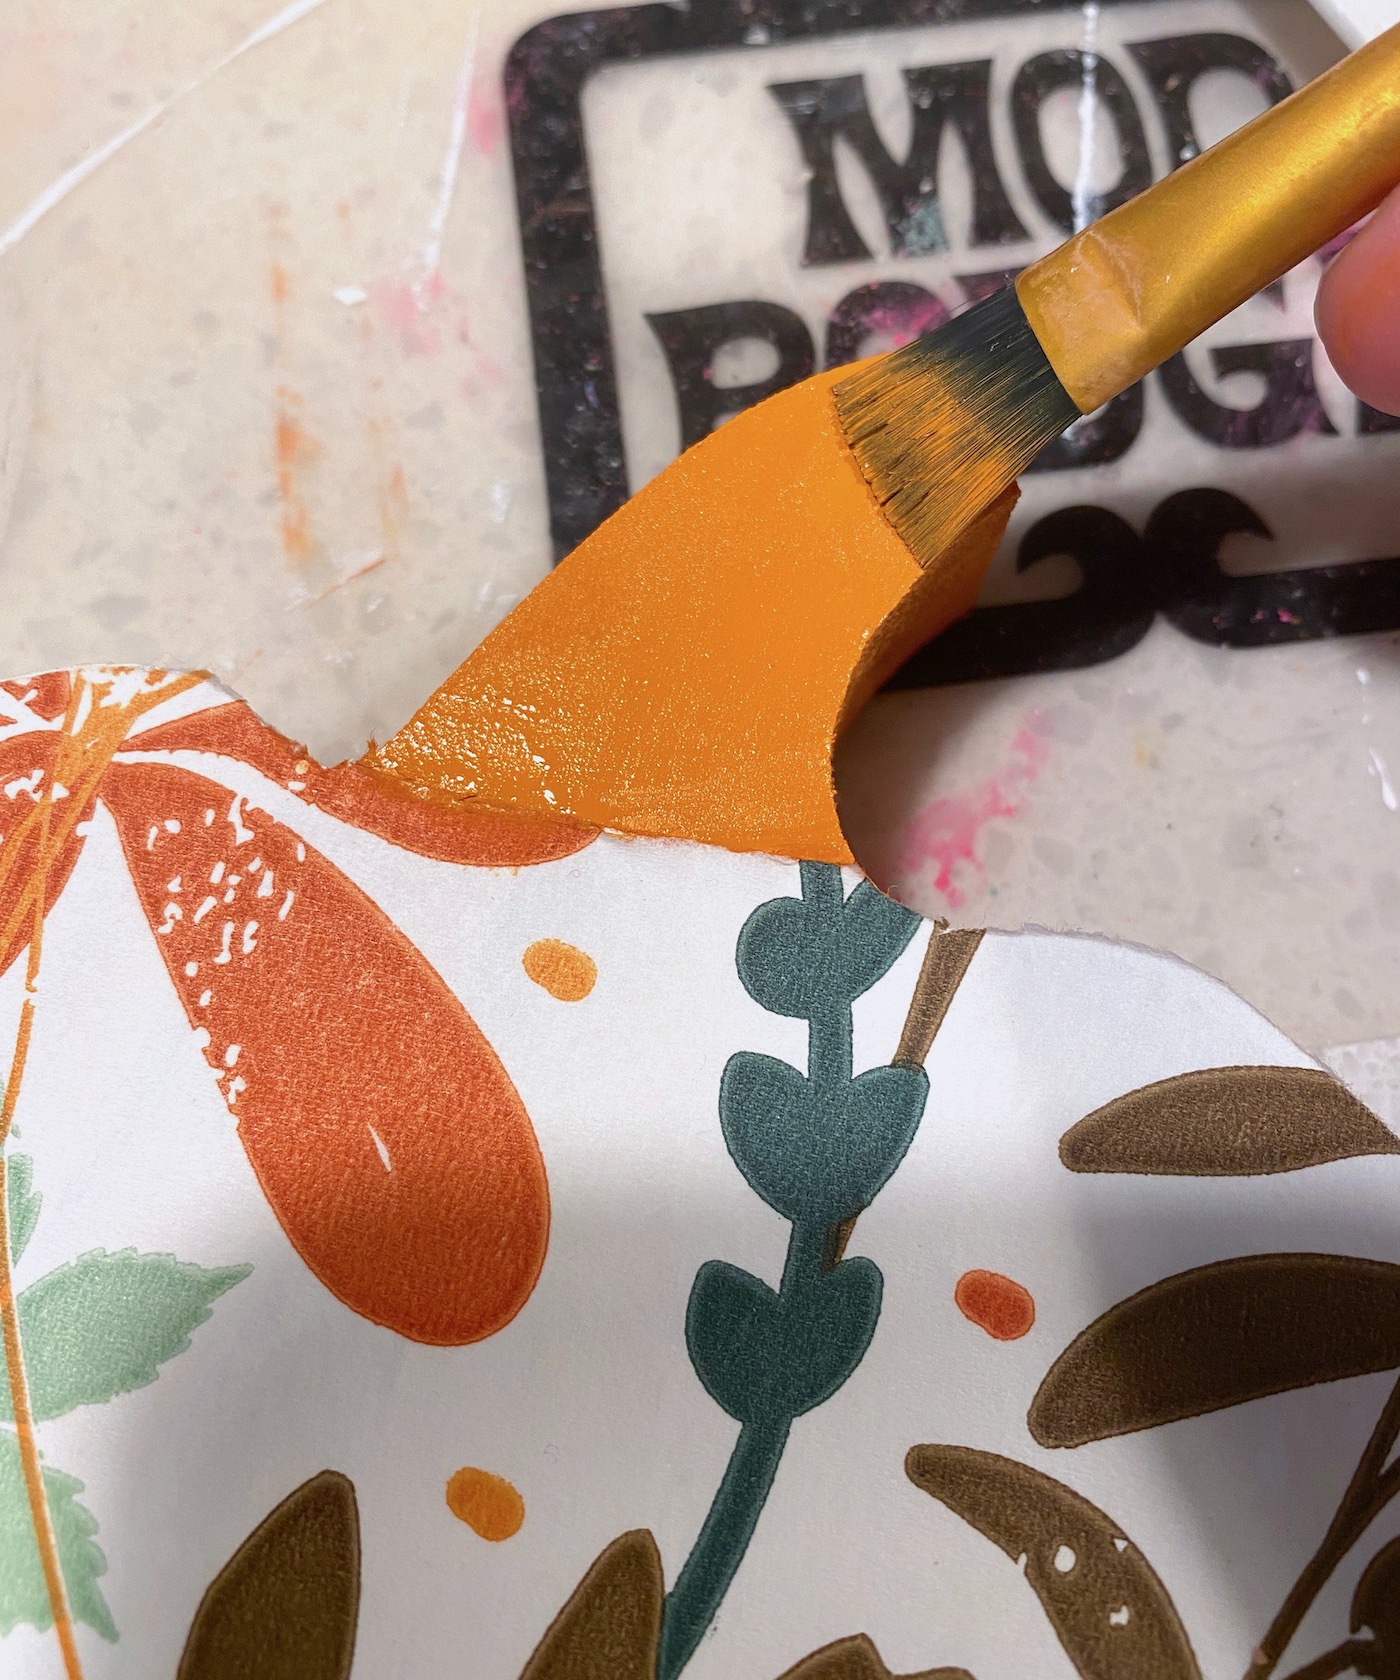 Painting the stem with orange craft paint